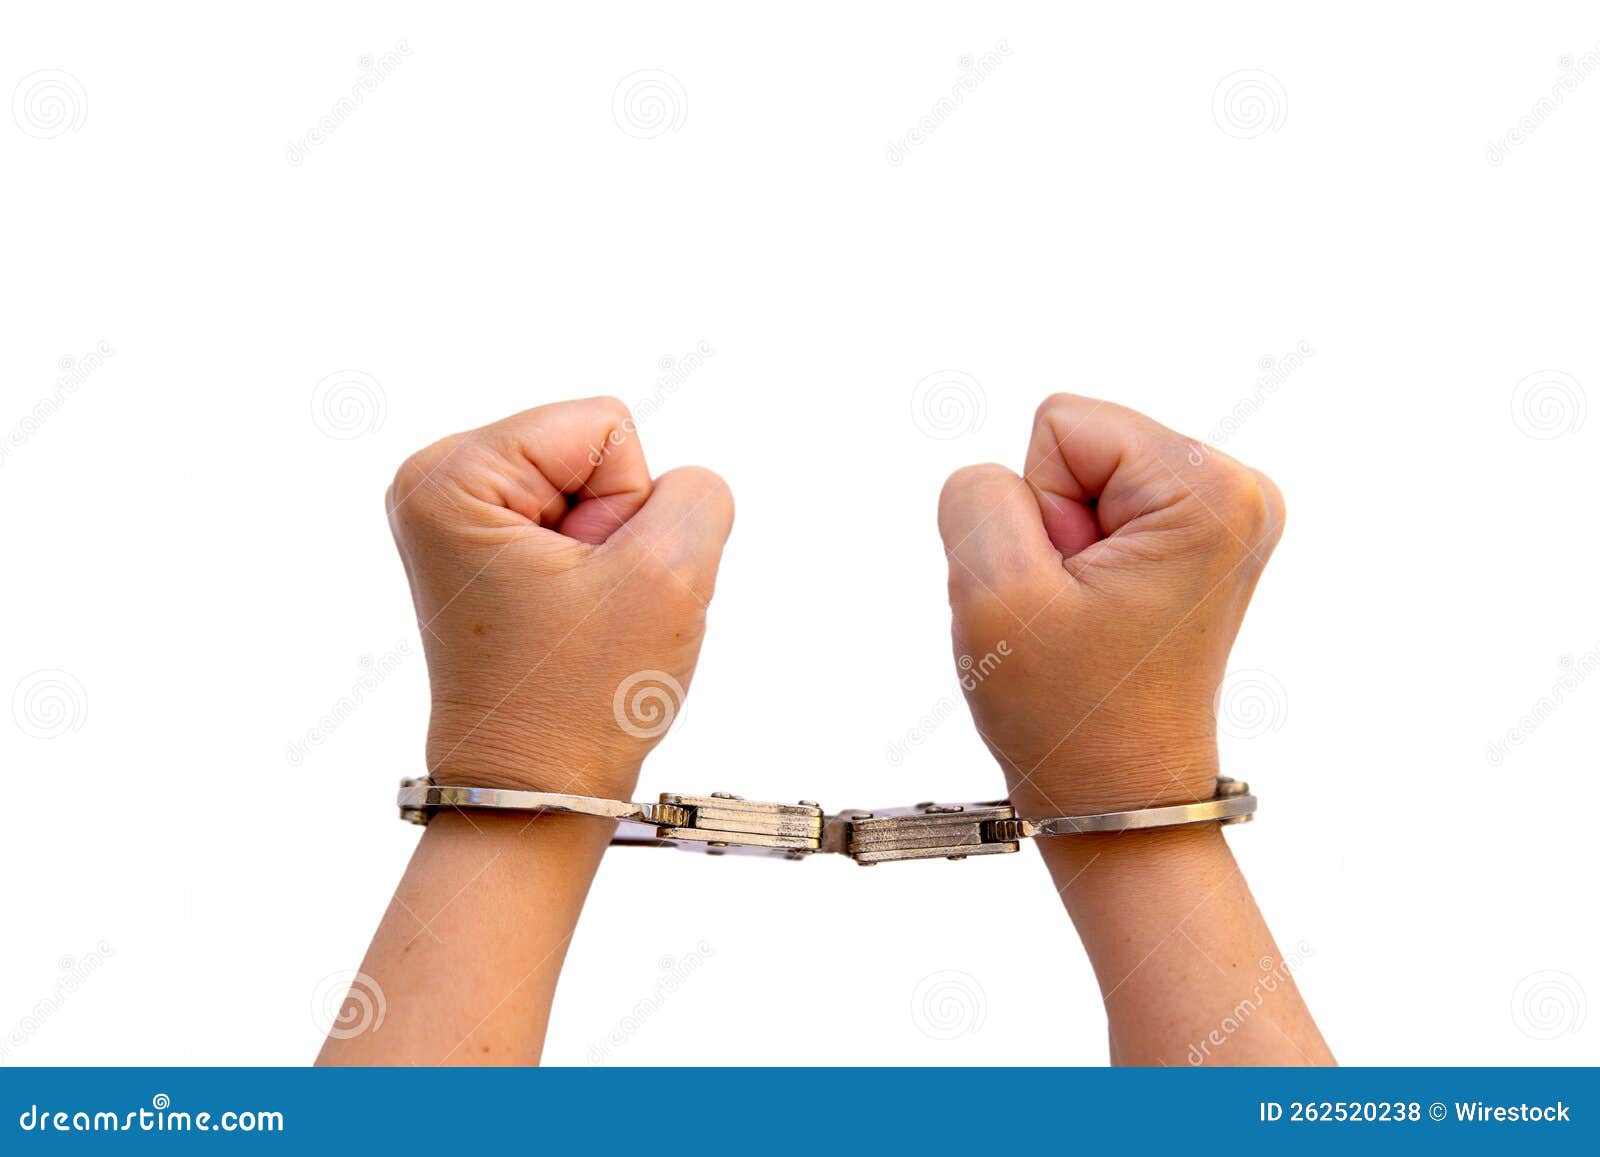 Handcuffed Woman Hands Royalty Free Stock Image